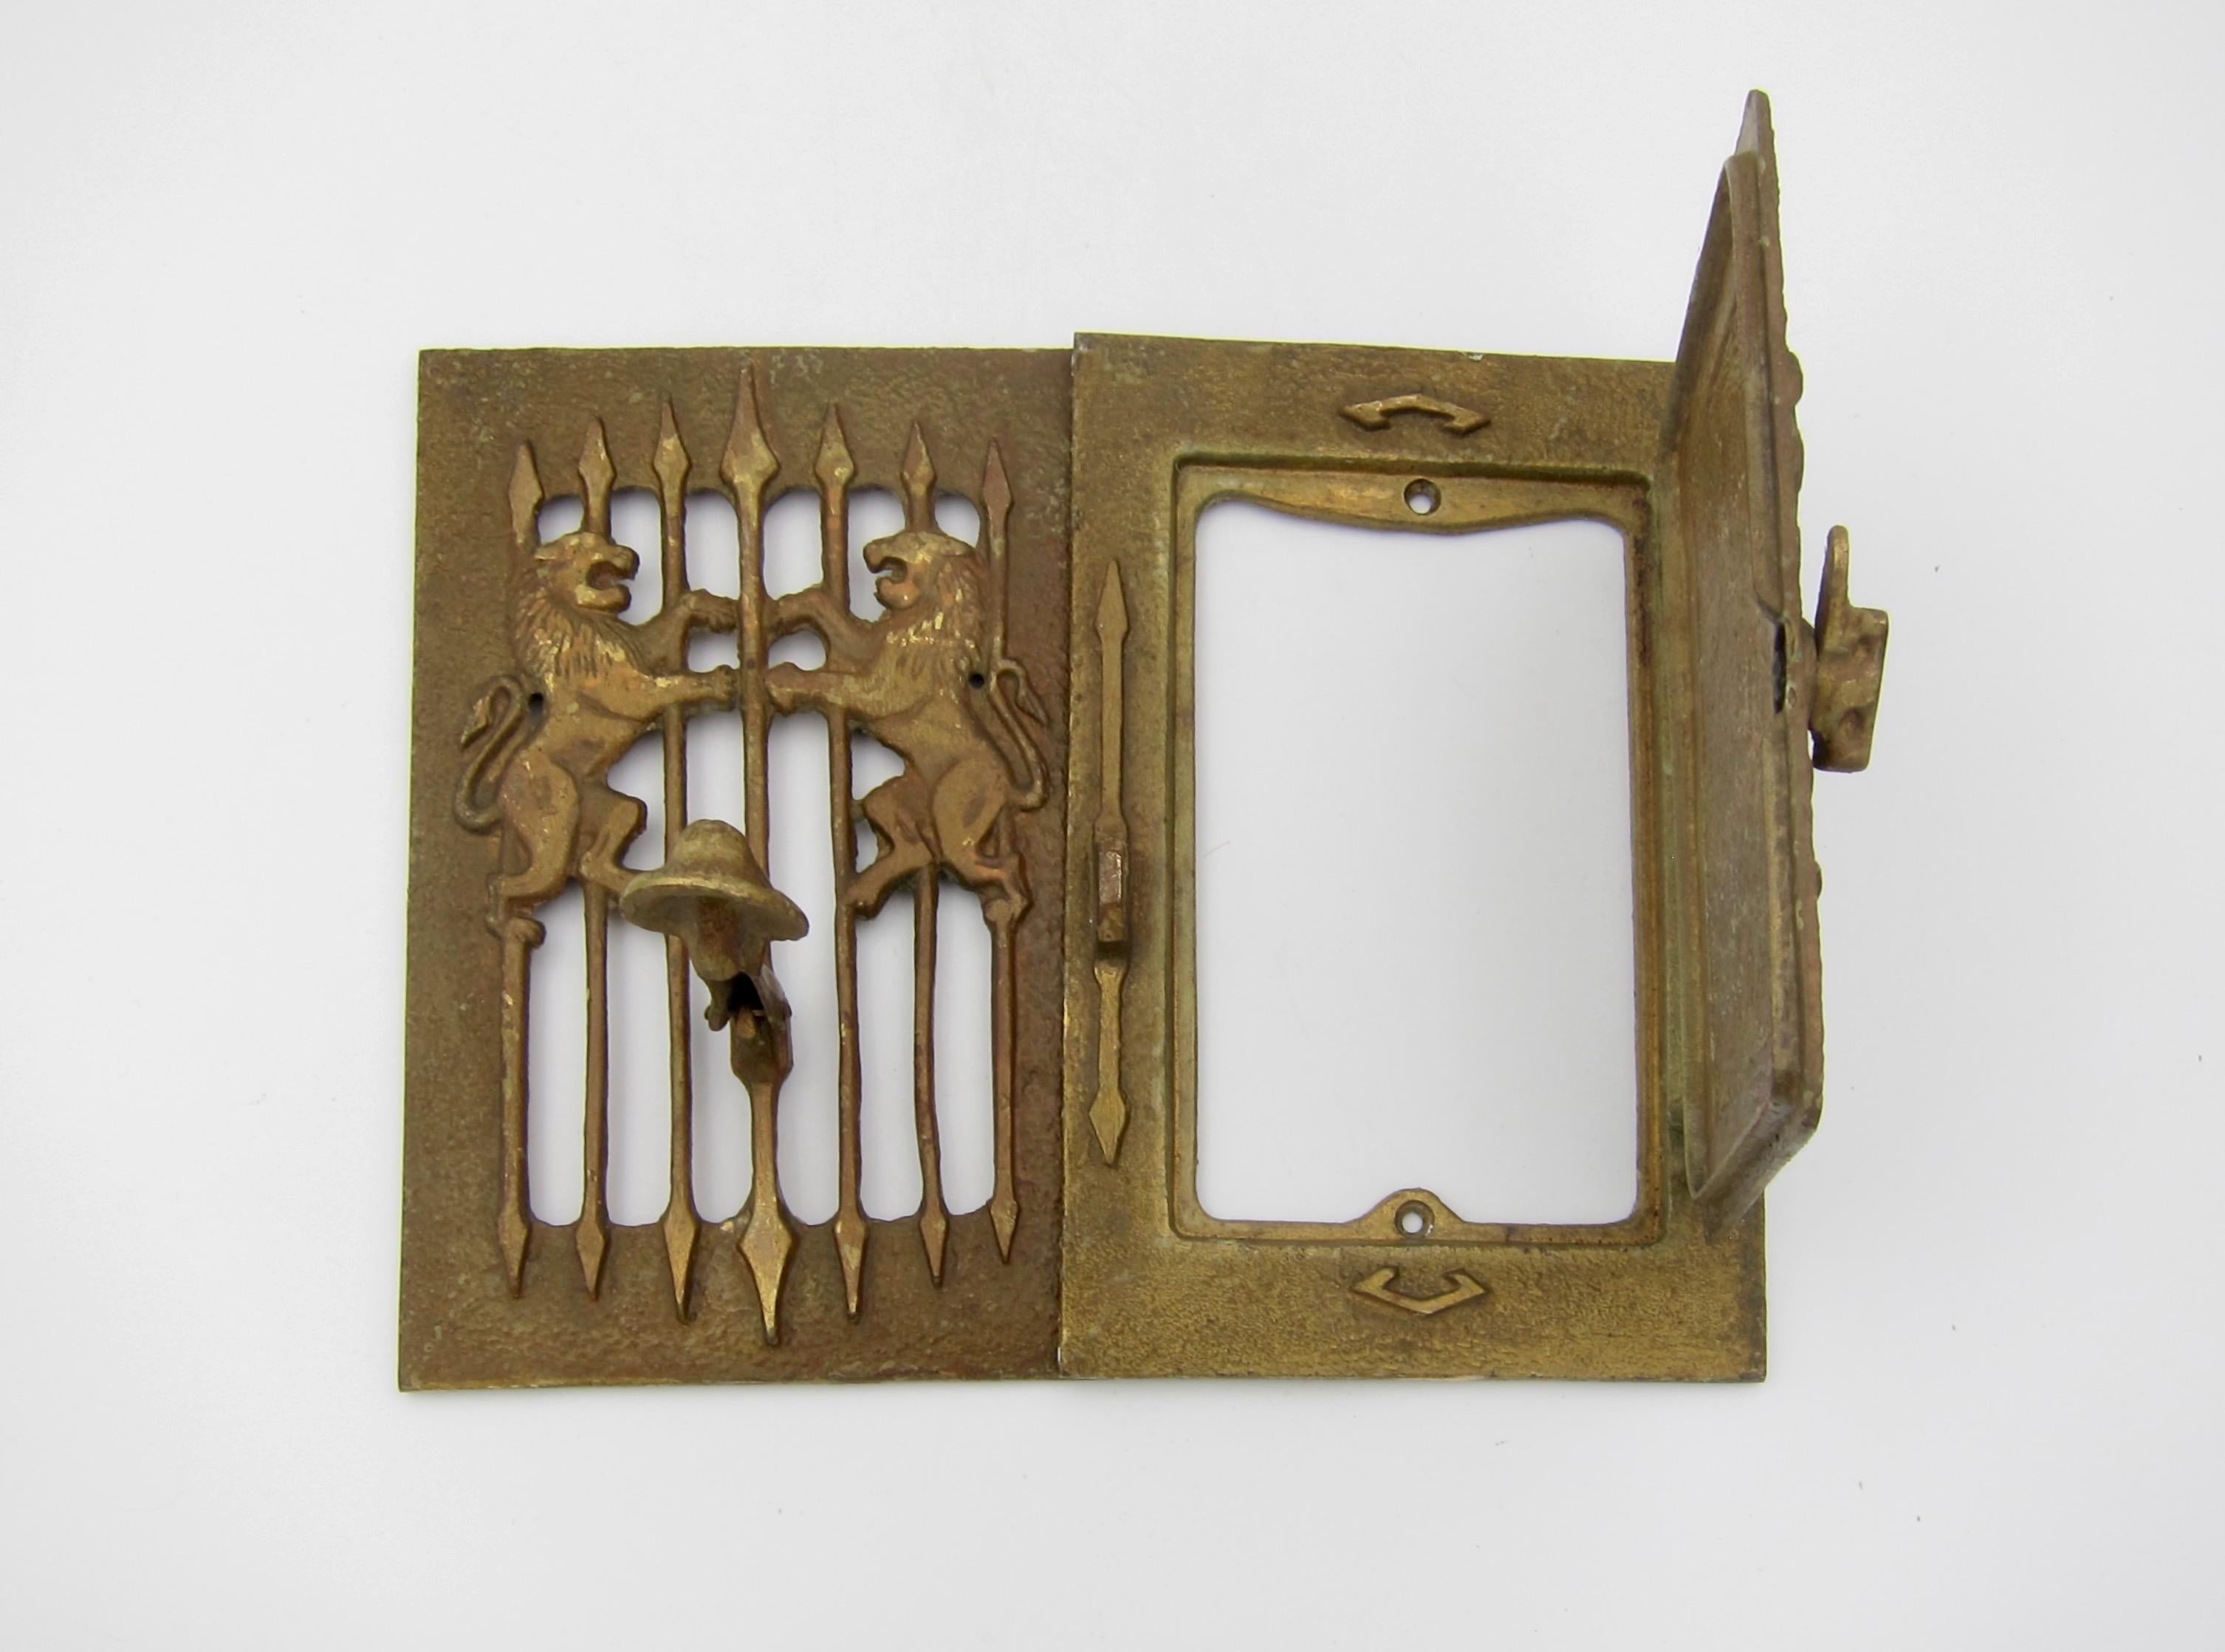 A two panel speakeasy door knocker and grill with a large inner peephole of rectangular shape that opens on side hinges and fastens closed. The ornate design of heavy cast metal was hand-finished with rivets securing the knocker on the front panel